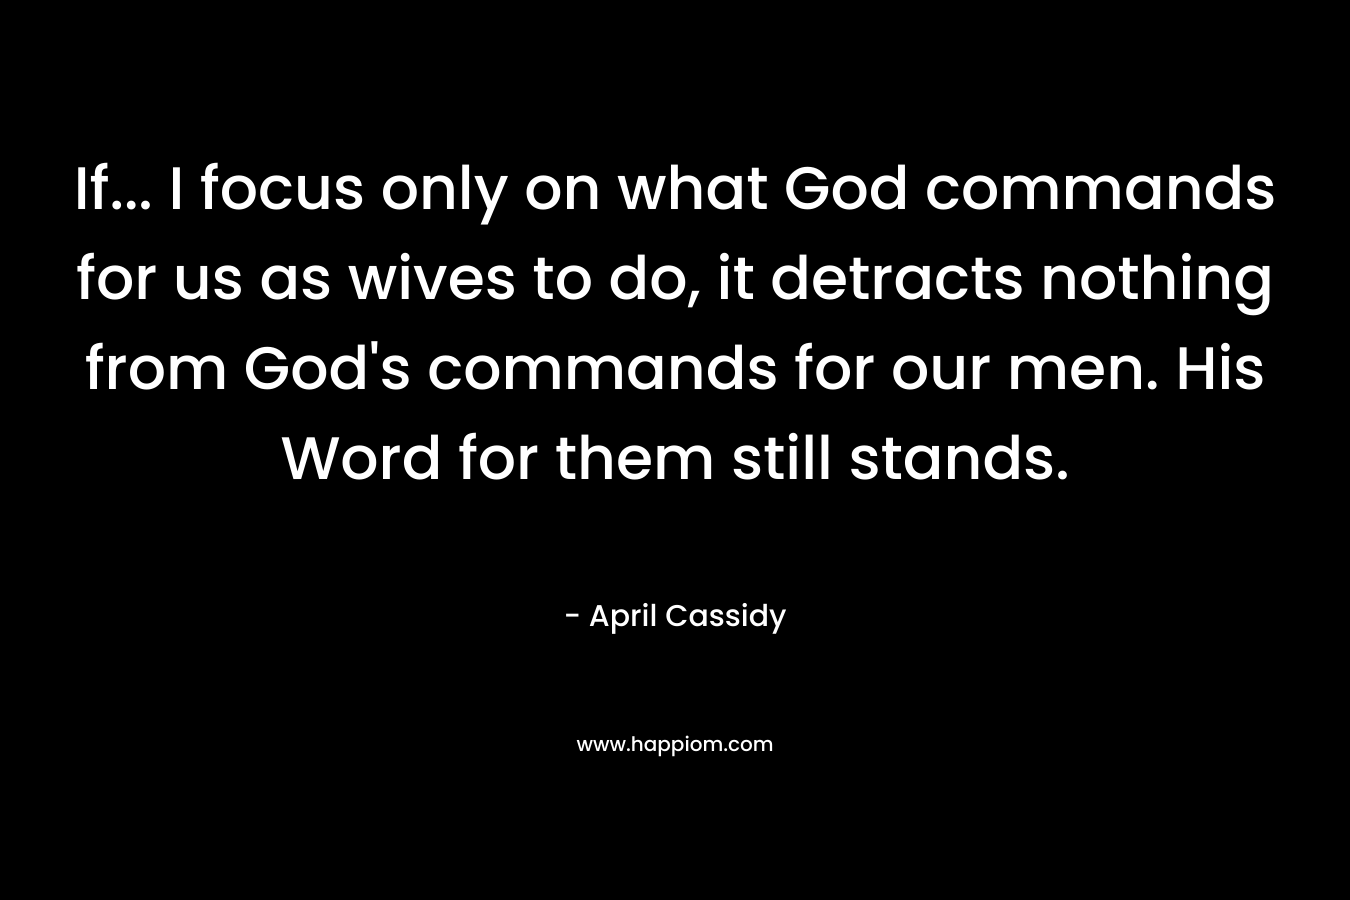 If... I focus only on what God commands for us as wives to do, it detracts nothing from God's commands for our men. His Word for them still stands.